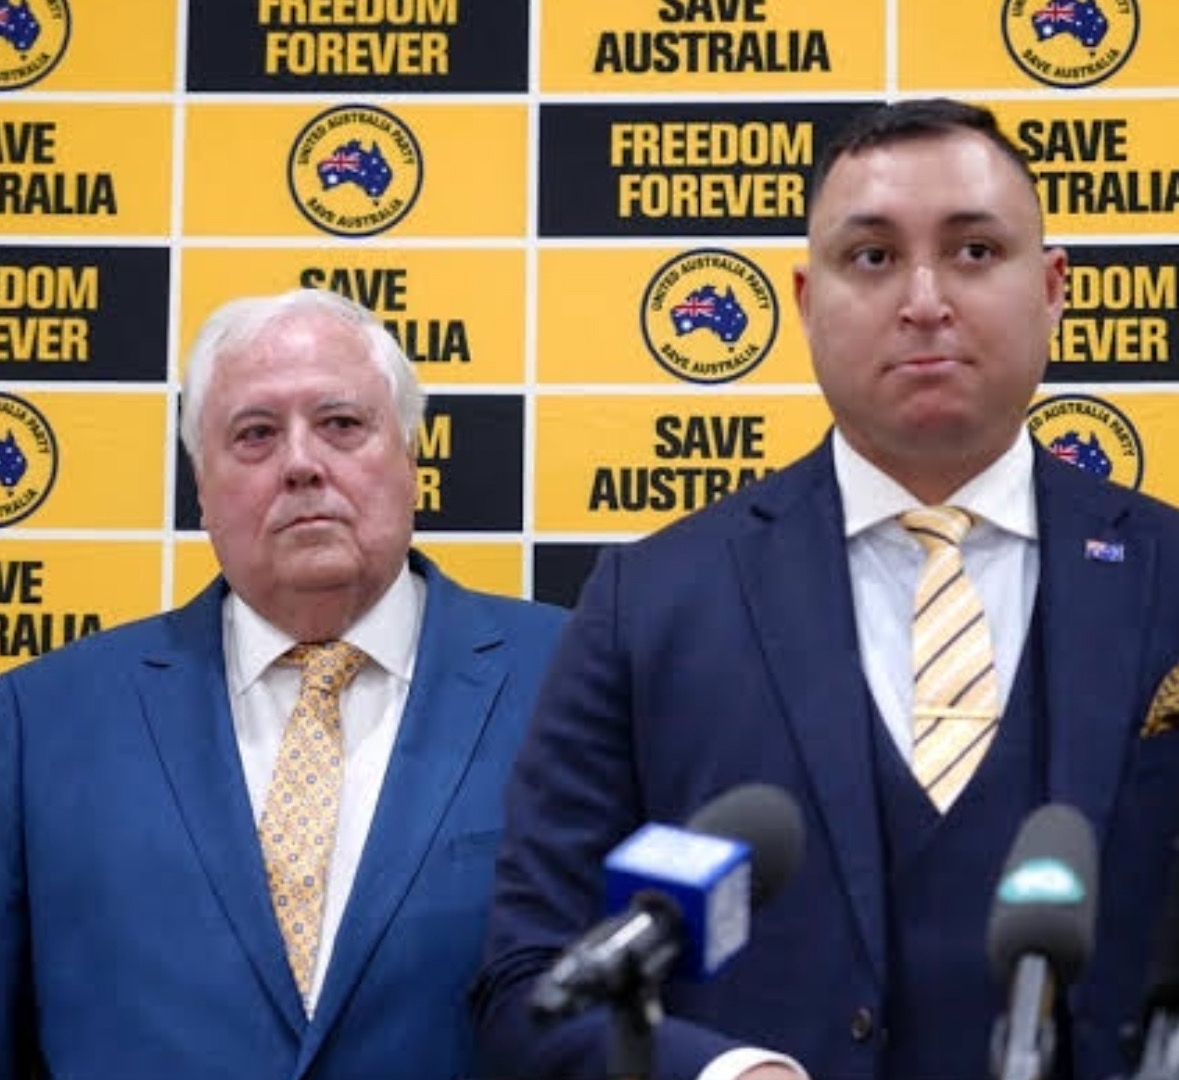 Just in! Clive Palmer & Ralph Babet have LOST their SECOND legal bid to have ticks declared invalid in Voice Referendum! 

The Full Federal Court DISMISSED their appeal.

Palmer & Babet were also ordered to pay the AEC’s costs